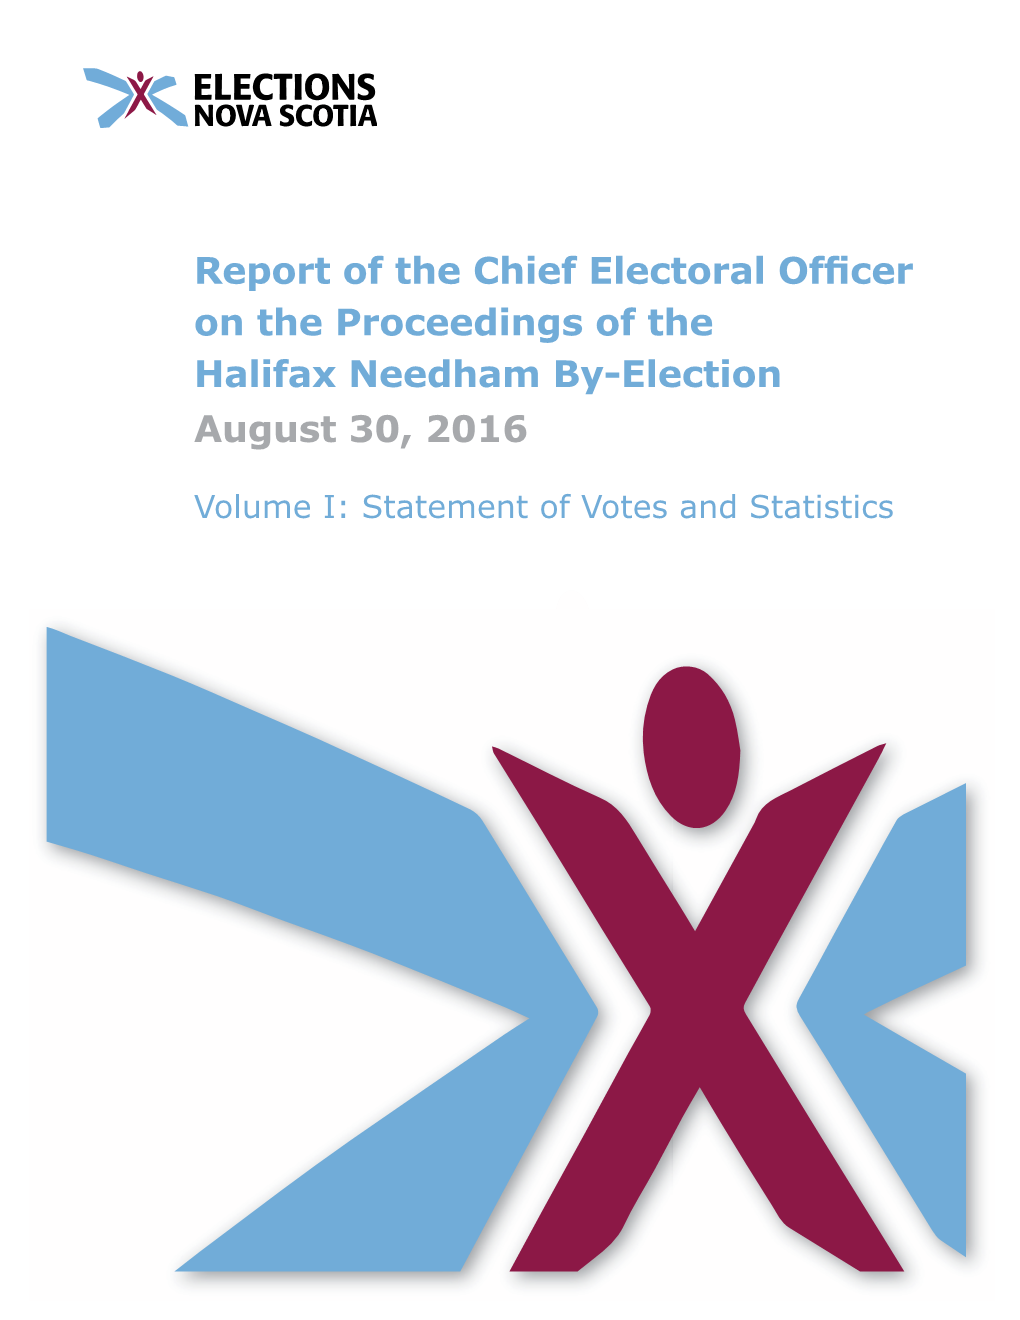 Report of the Chief Electoral Officer on the Proceedings of the Halifax Needham By-Election August 30, 2016